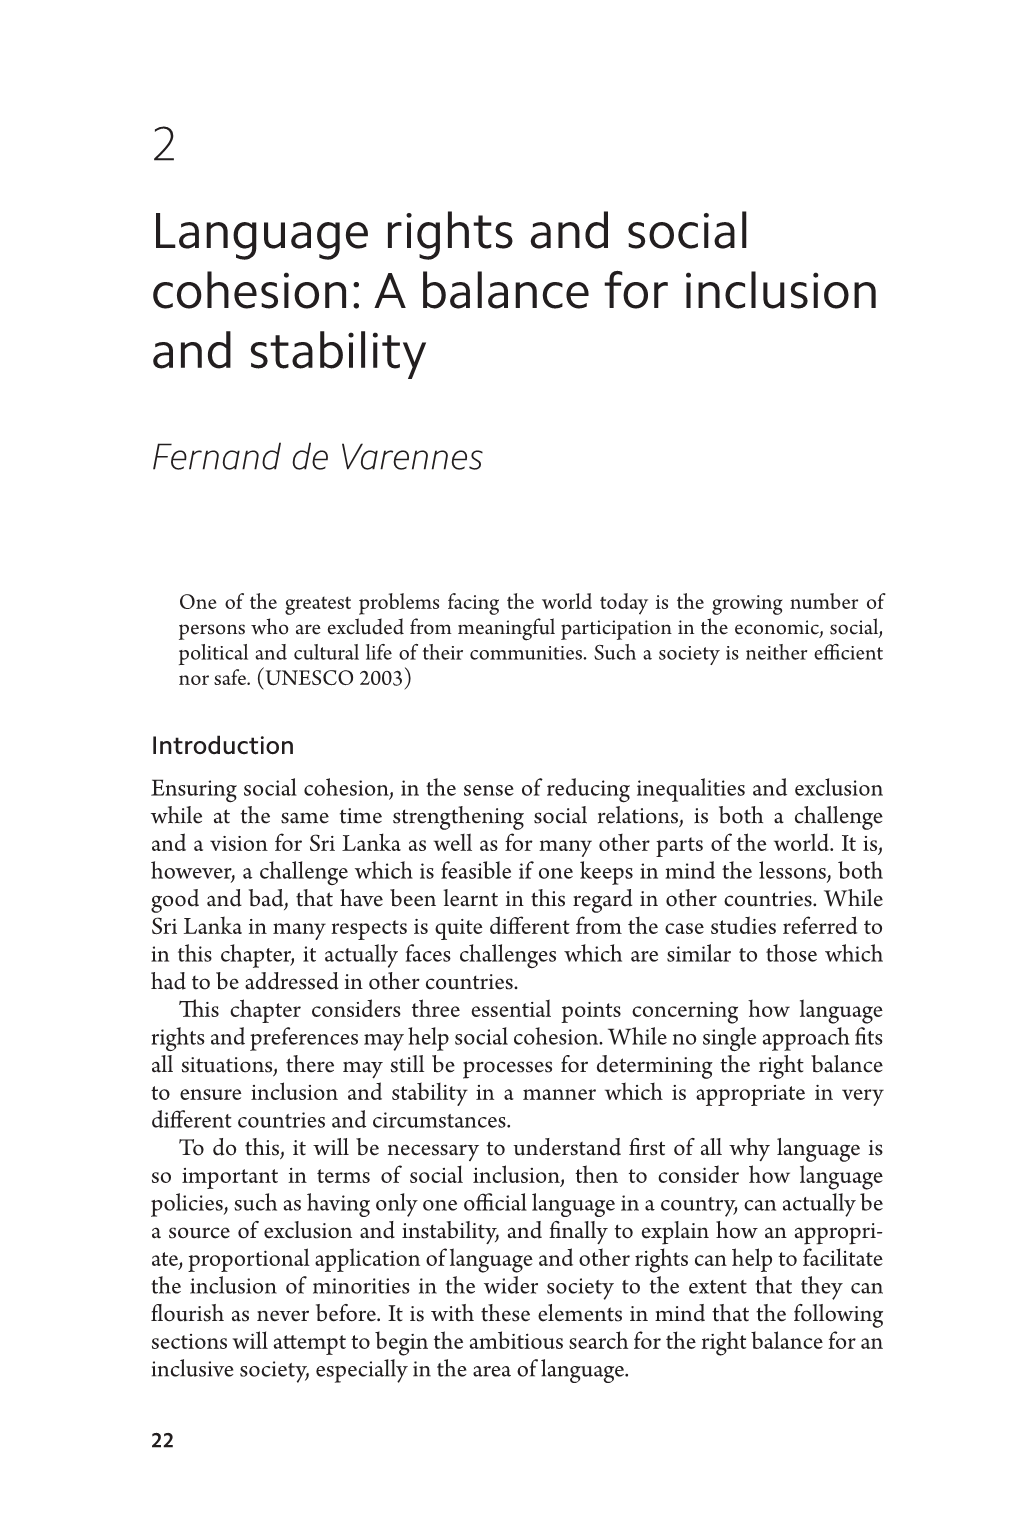 Language Rights and Social Cohesion: a Balance for Inclusion and Stability